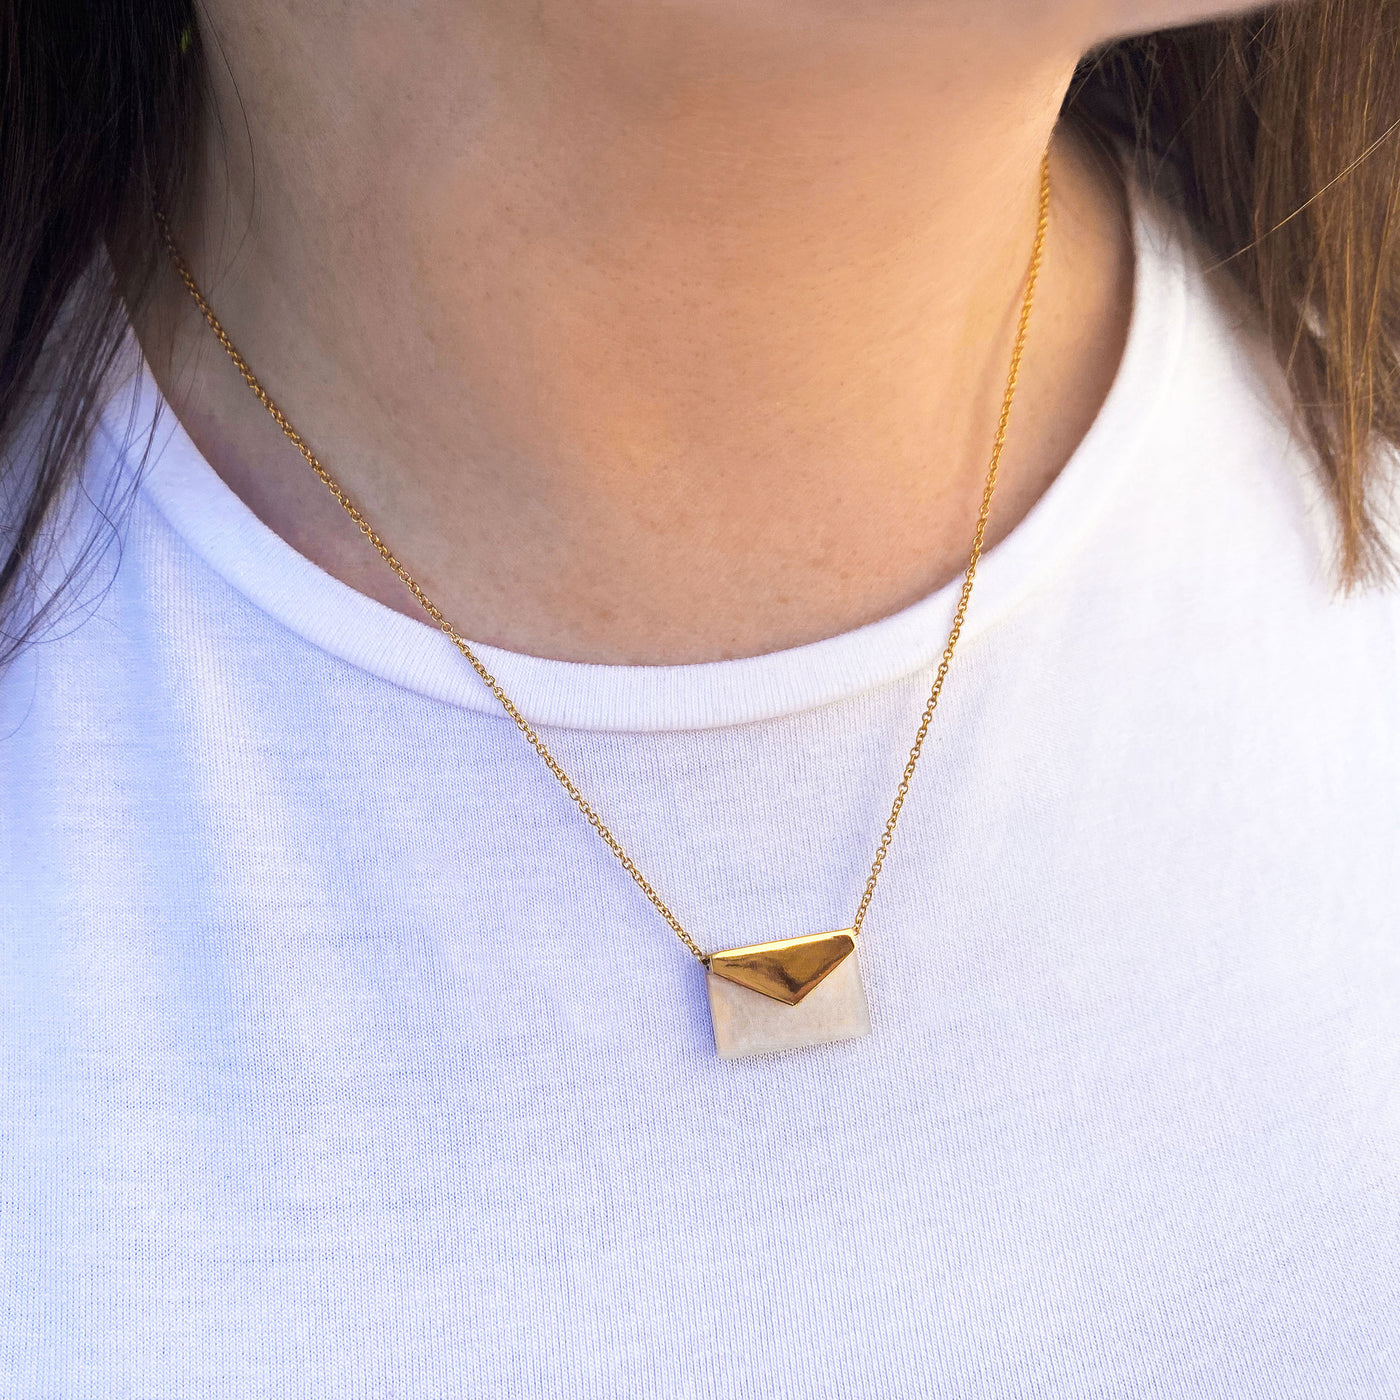 Gold envelope necklace with moonstone